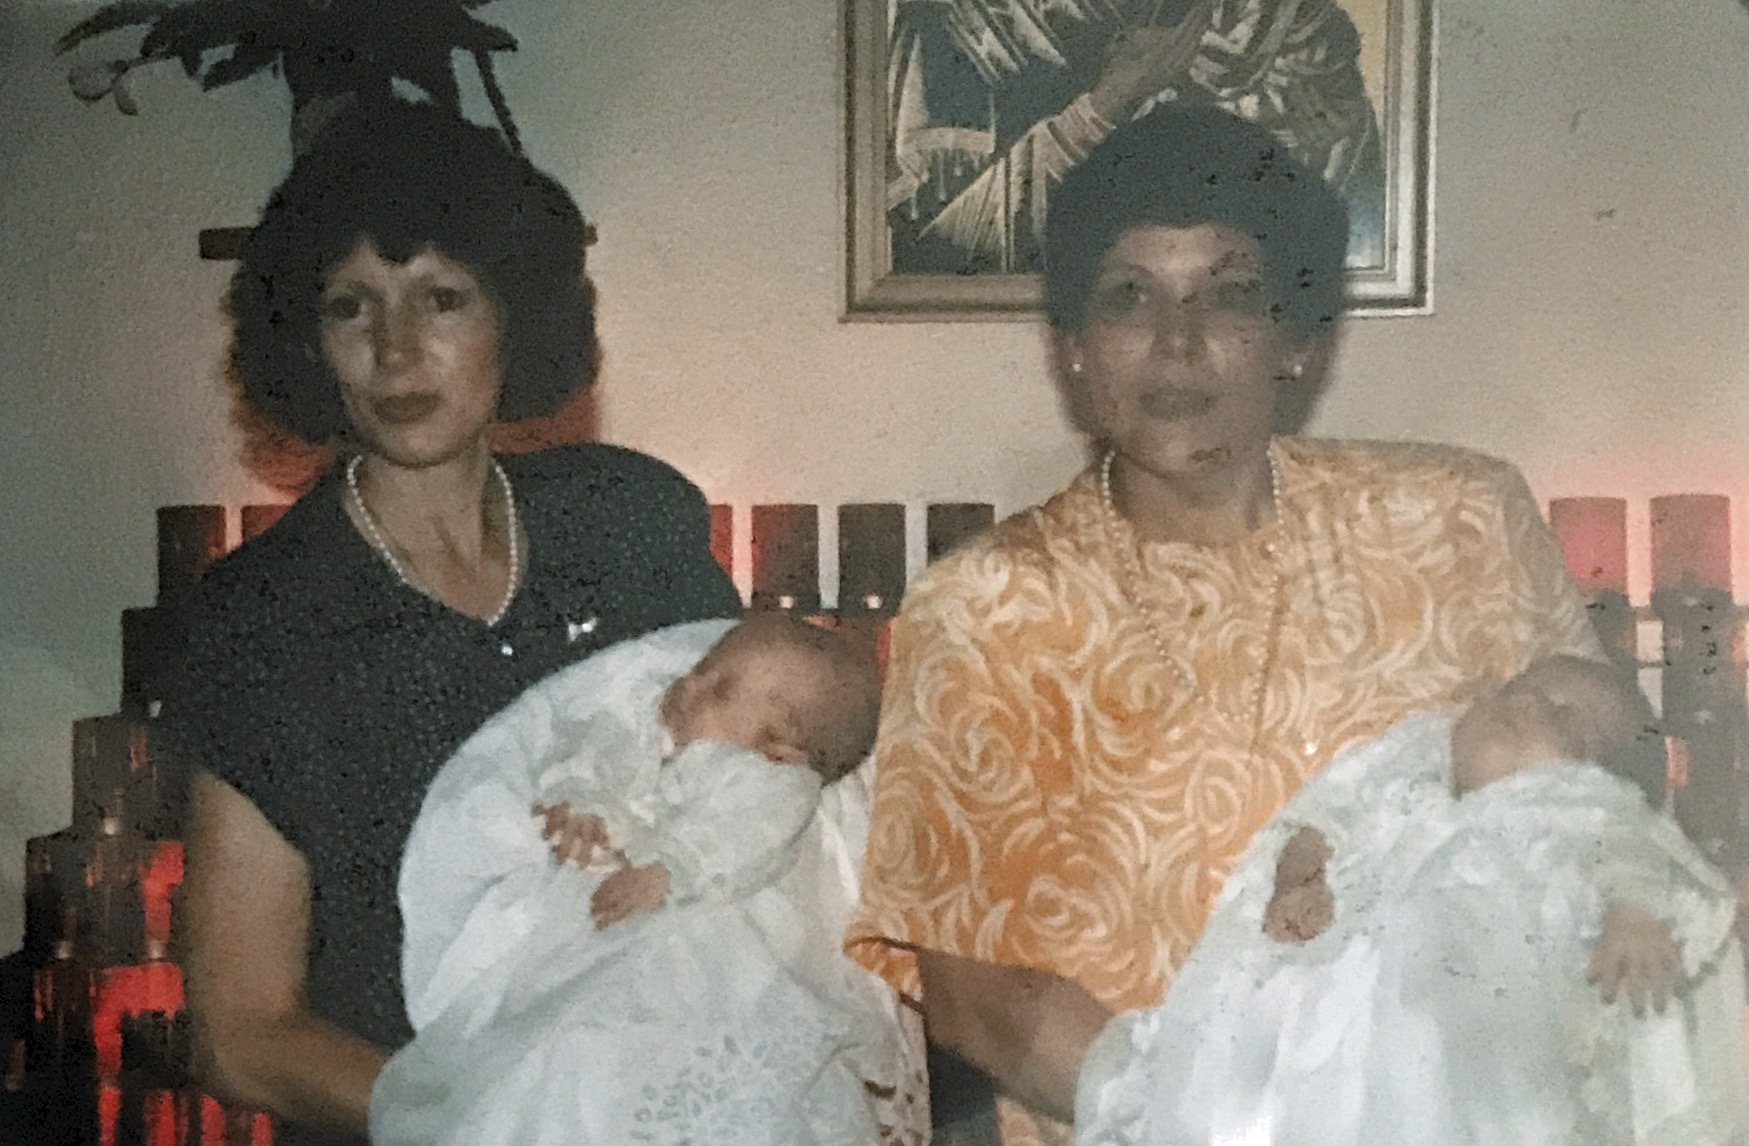 Baptism of twins Erik Lawrence and Mark Finlay Leyden with Godmothers Jeannie Green (L) and Juanita Green (R) in 1988.